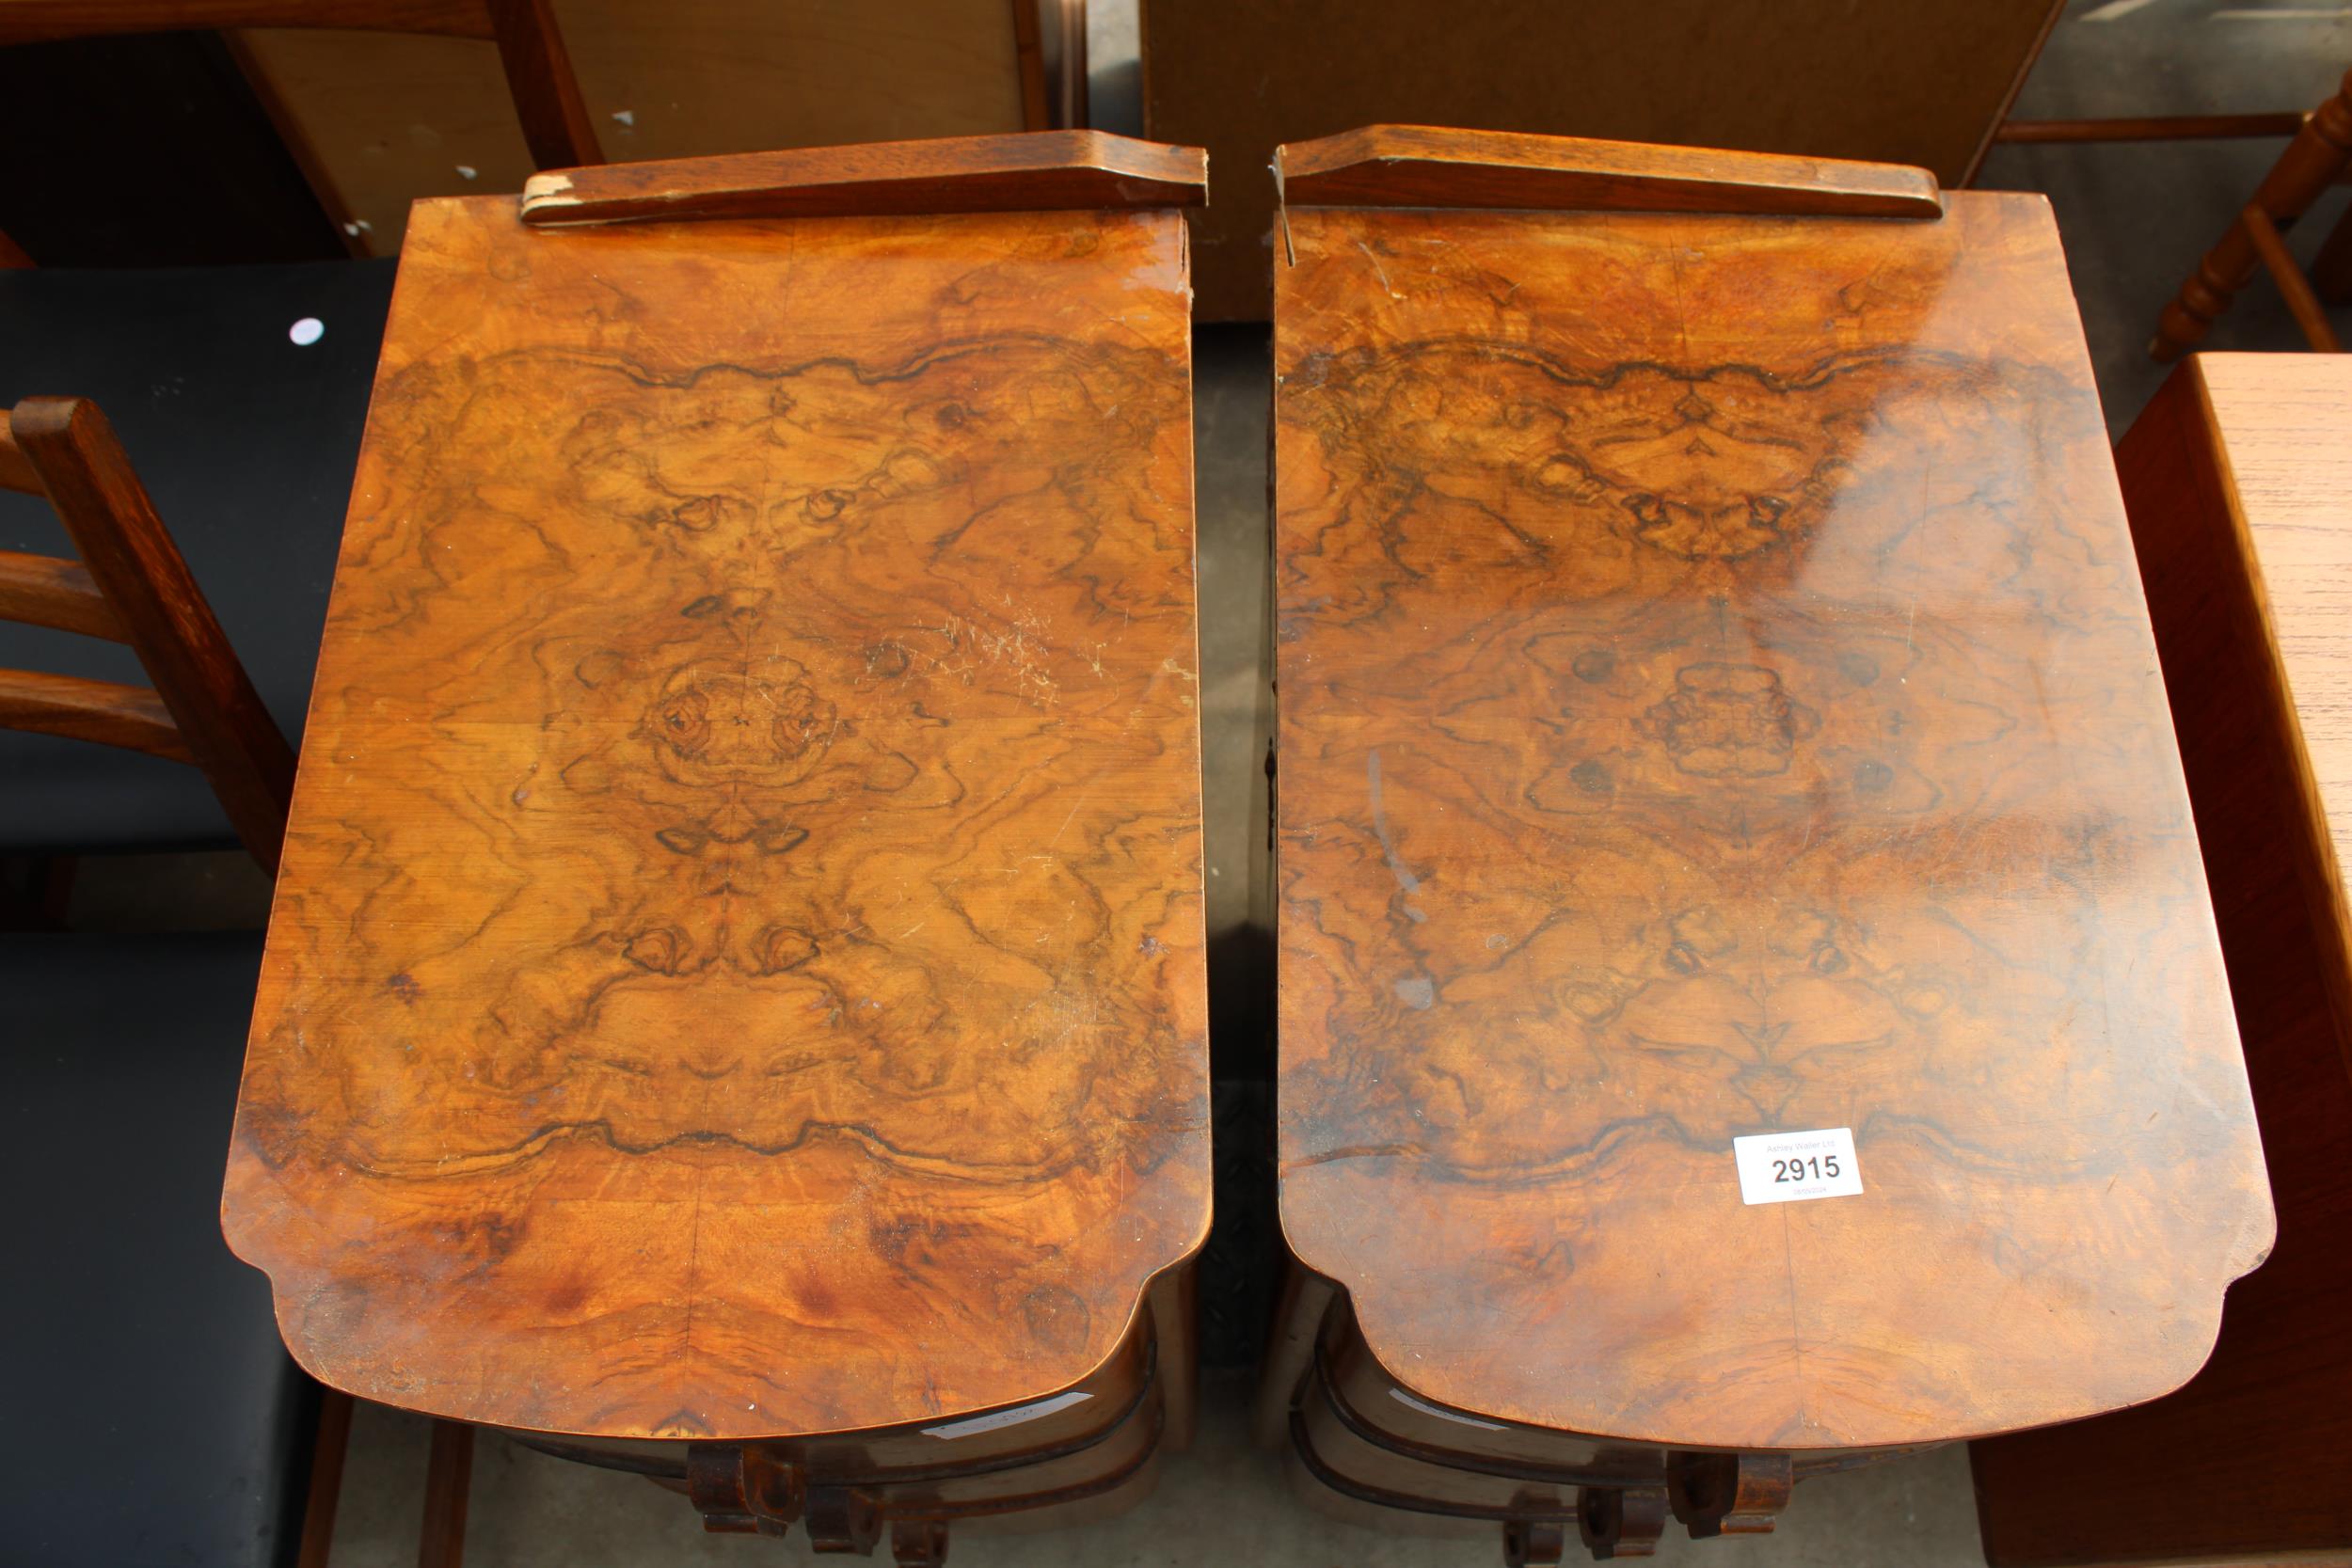 A PAIR OF WALNUT ART DECO THREE DRAWER CHESTS 12.5" WIDE EACH (CUT DOWN DRESSING TABLE) - Image 3 of 4